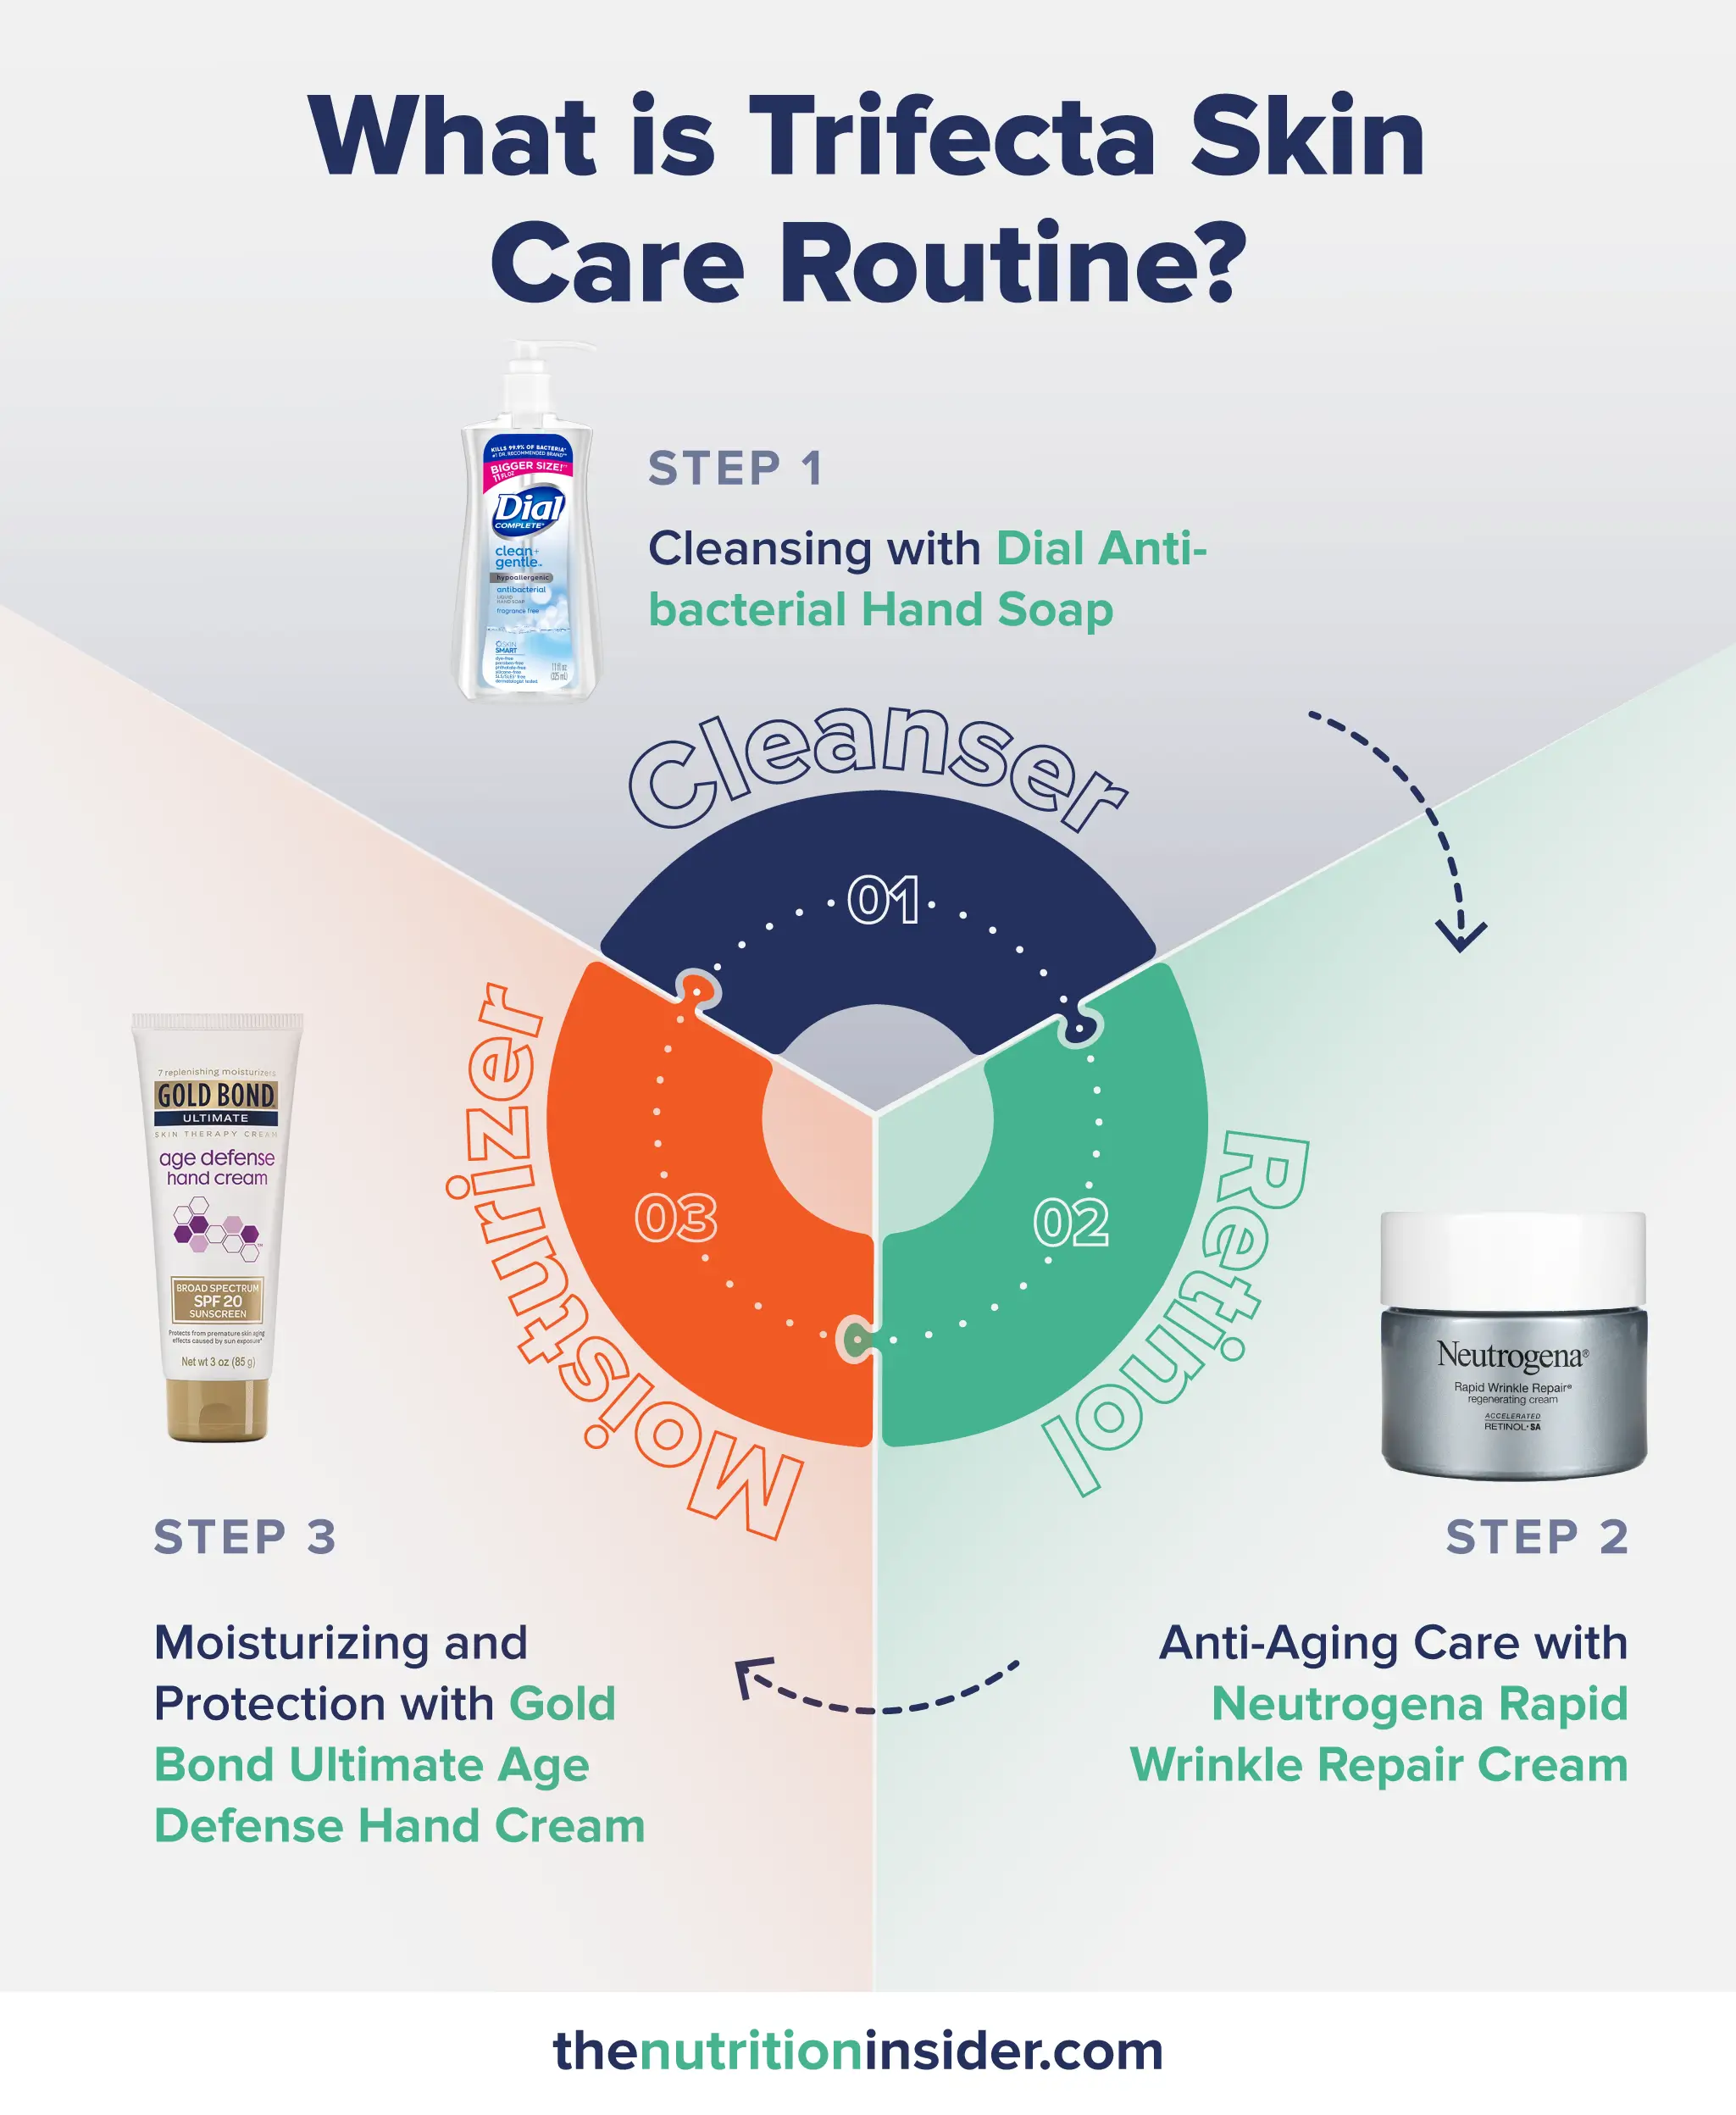 What is Trifecta Skin Care Routine?